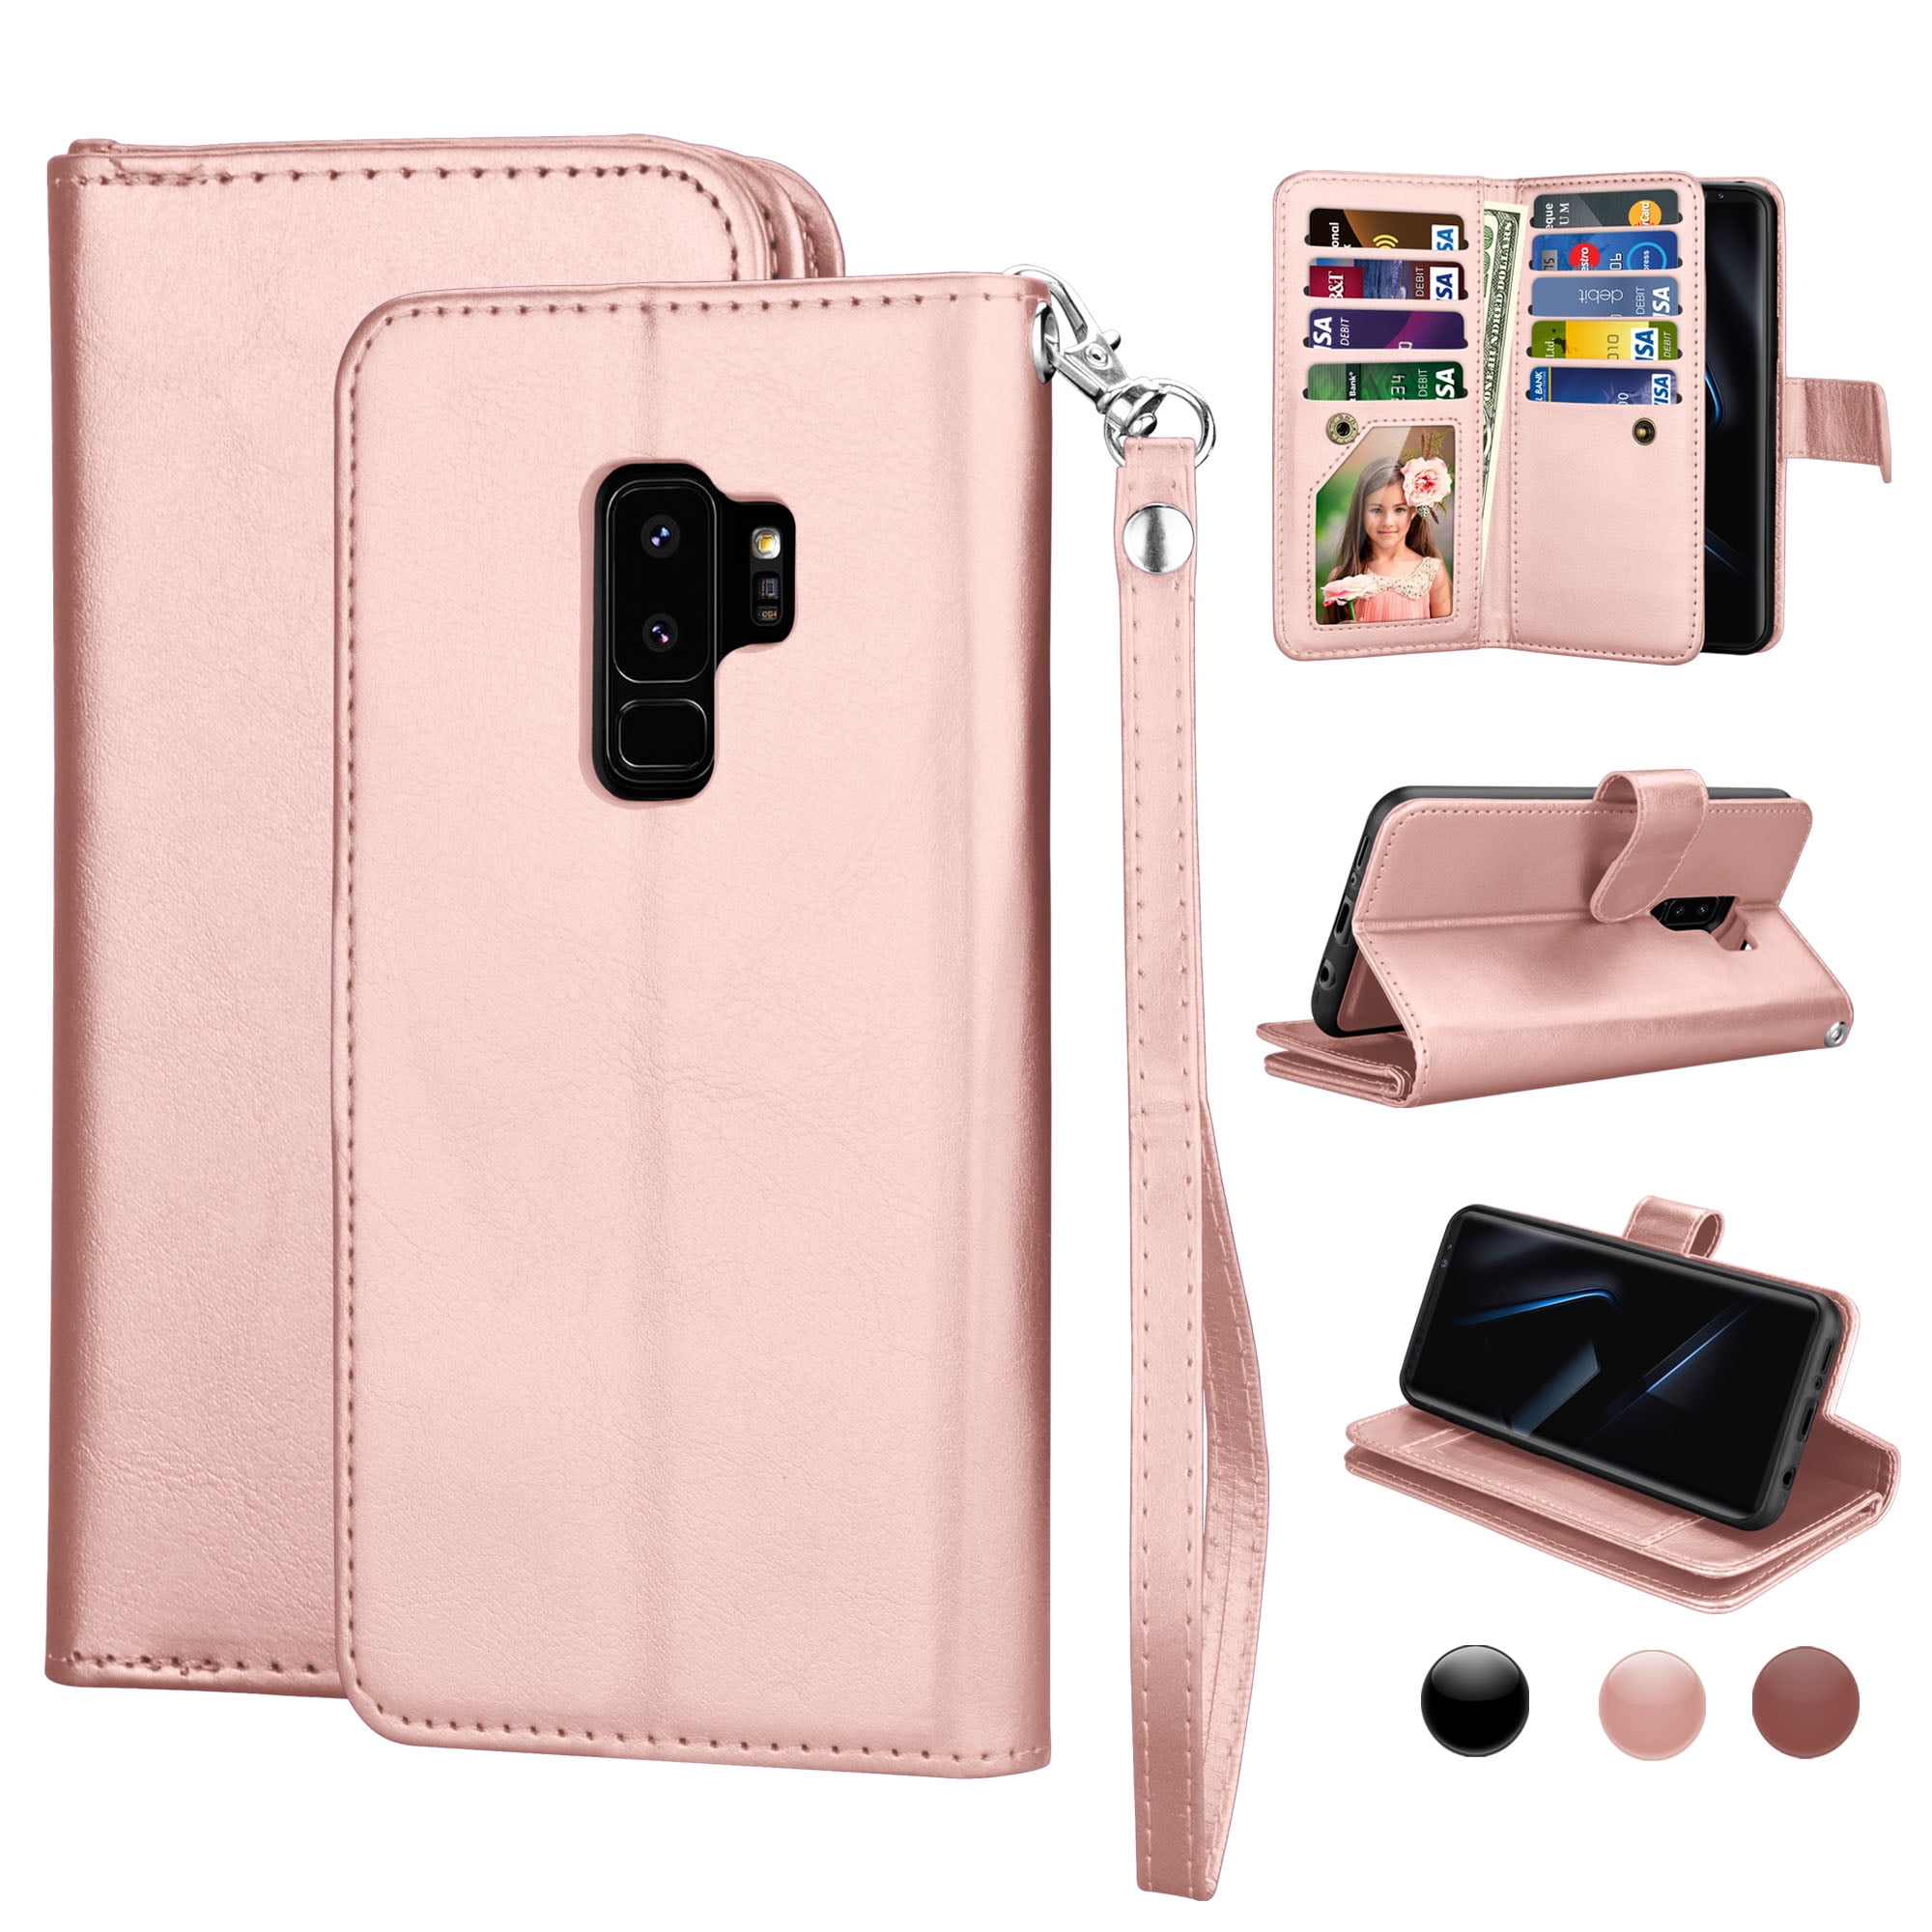 Stylish Cover Compatible with Samsung Galaxy S10 Plus Brown Leather Flip Case Wallet for Samsung Galaxy S10 Plus 